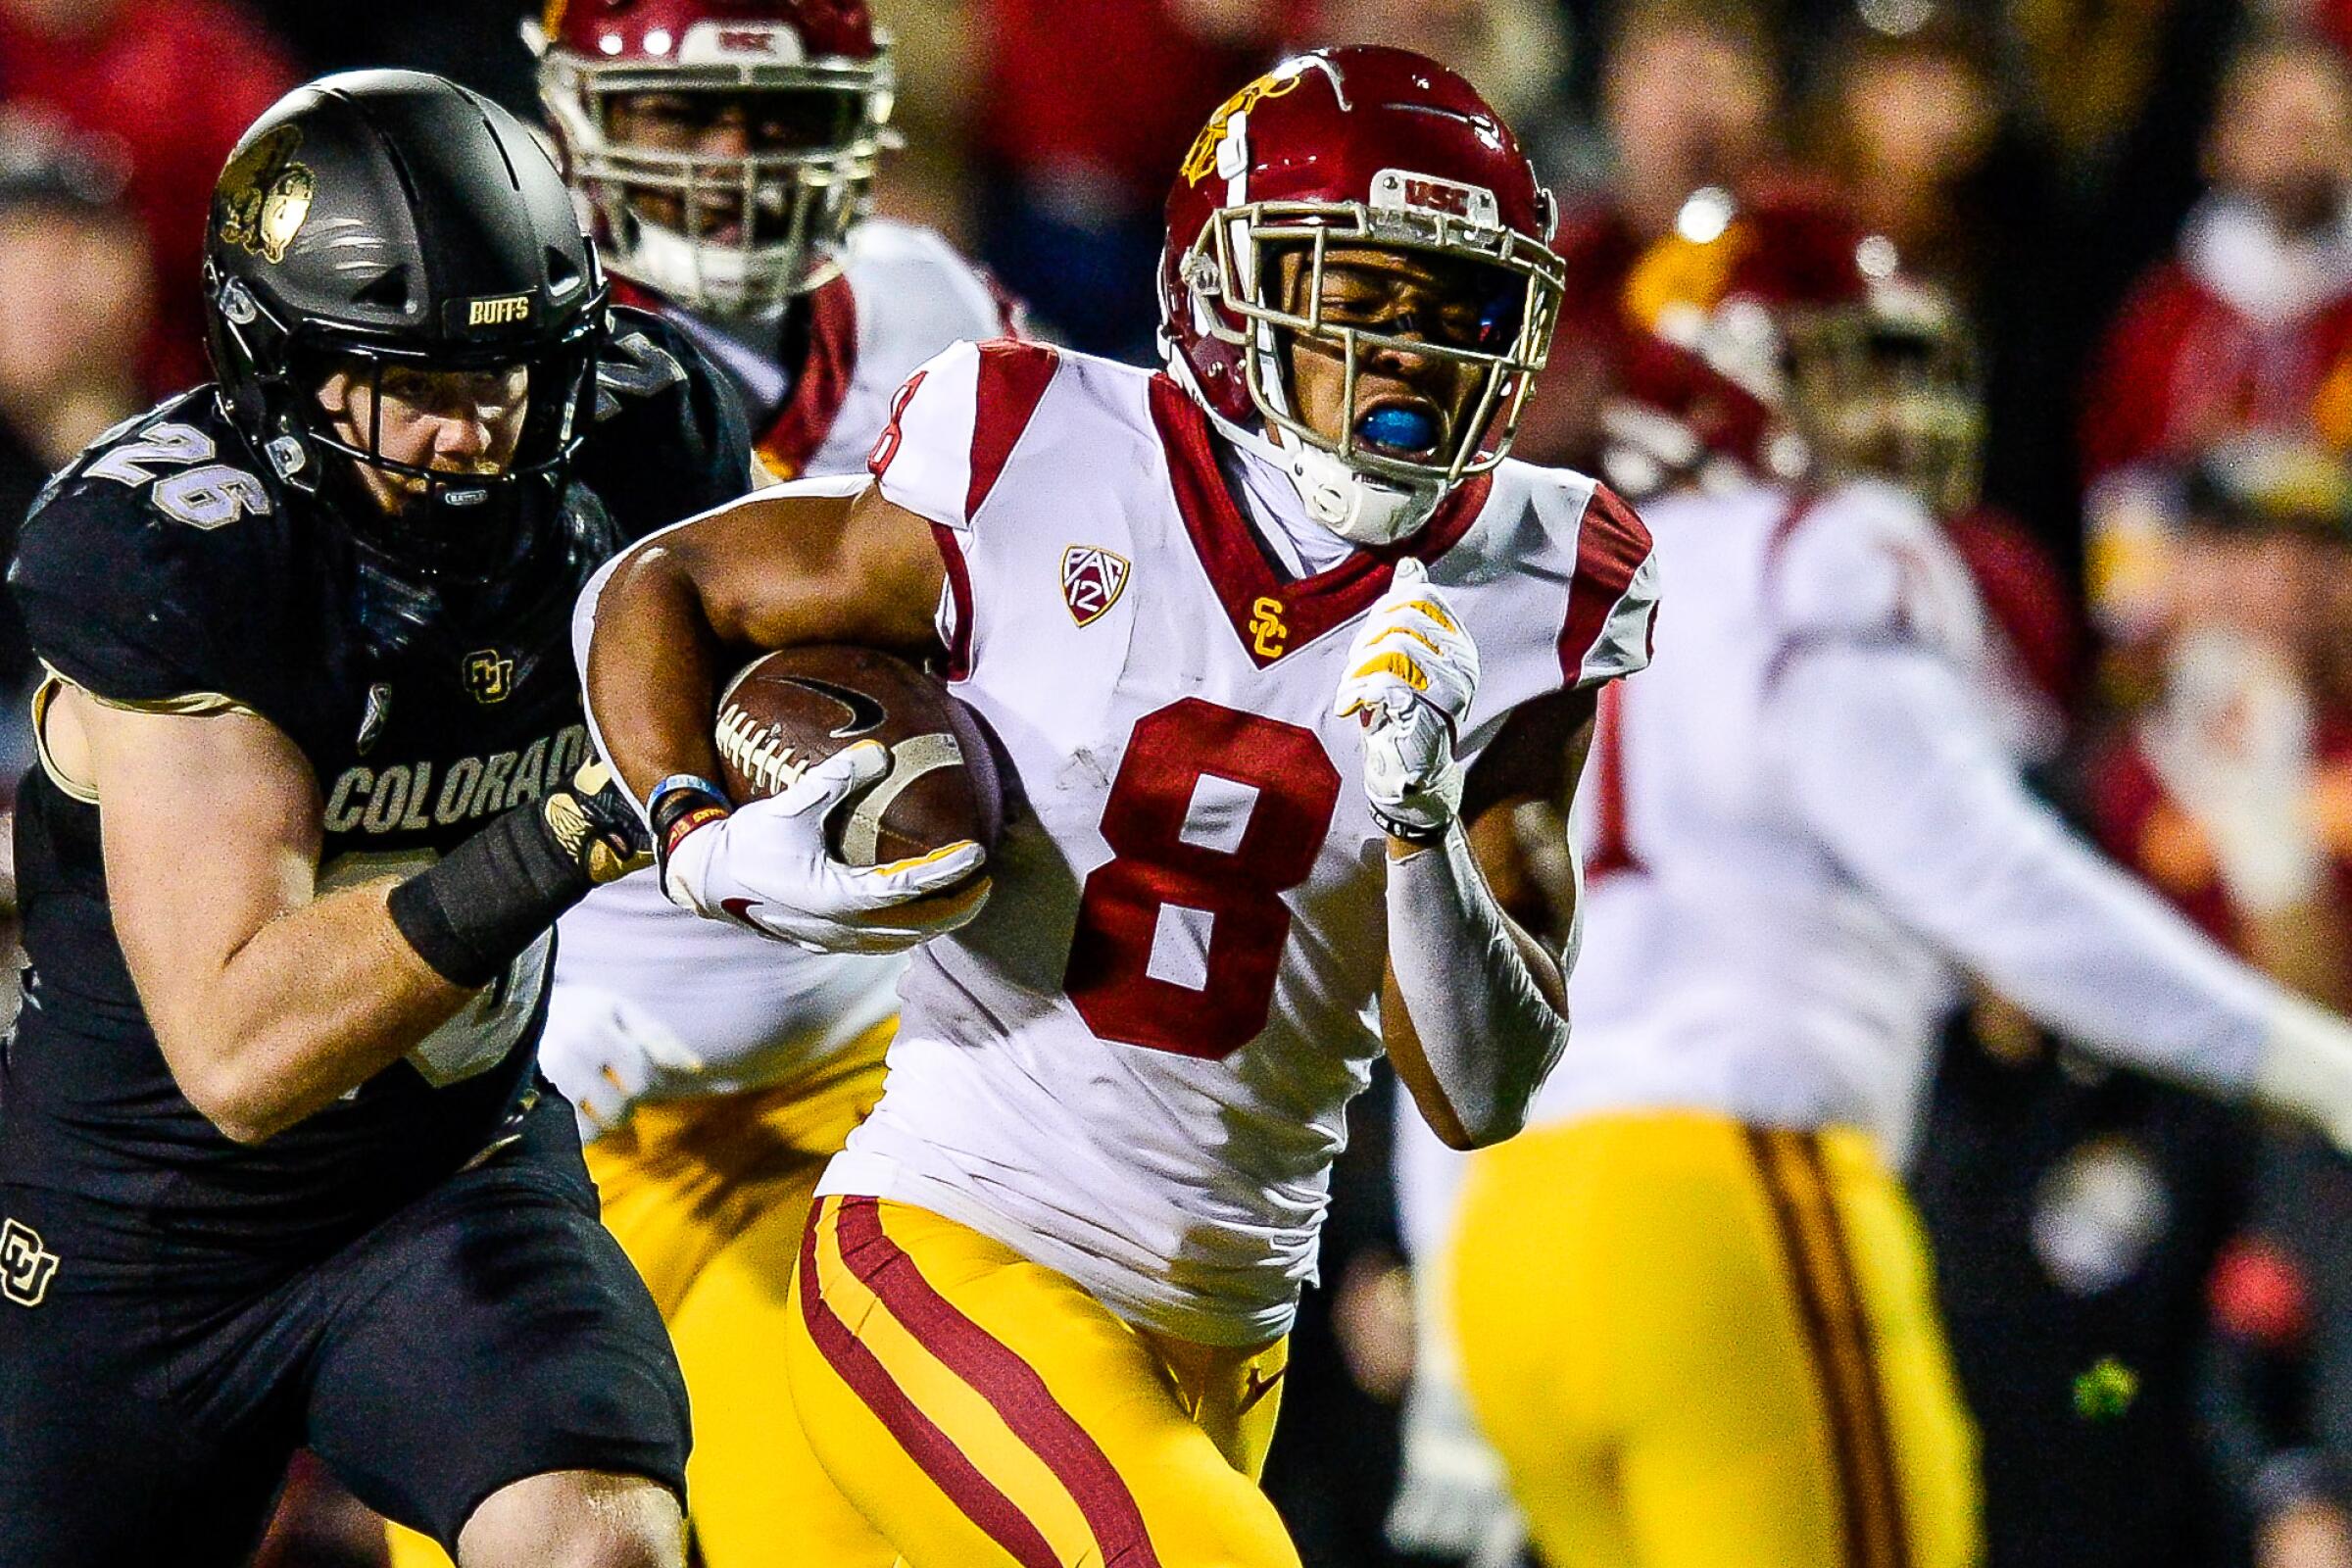 USC receiver Amon-Ra St. Brown scores a touchdown against Colorado during a 2019 game.